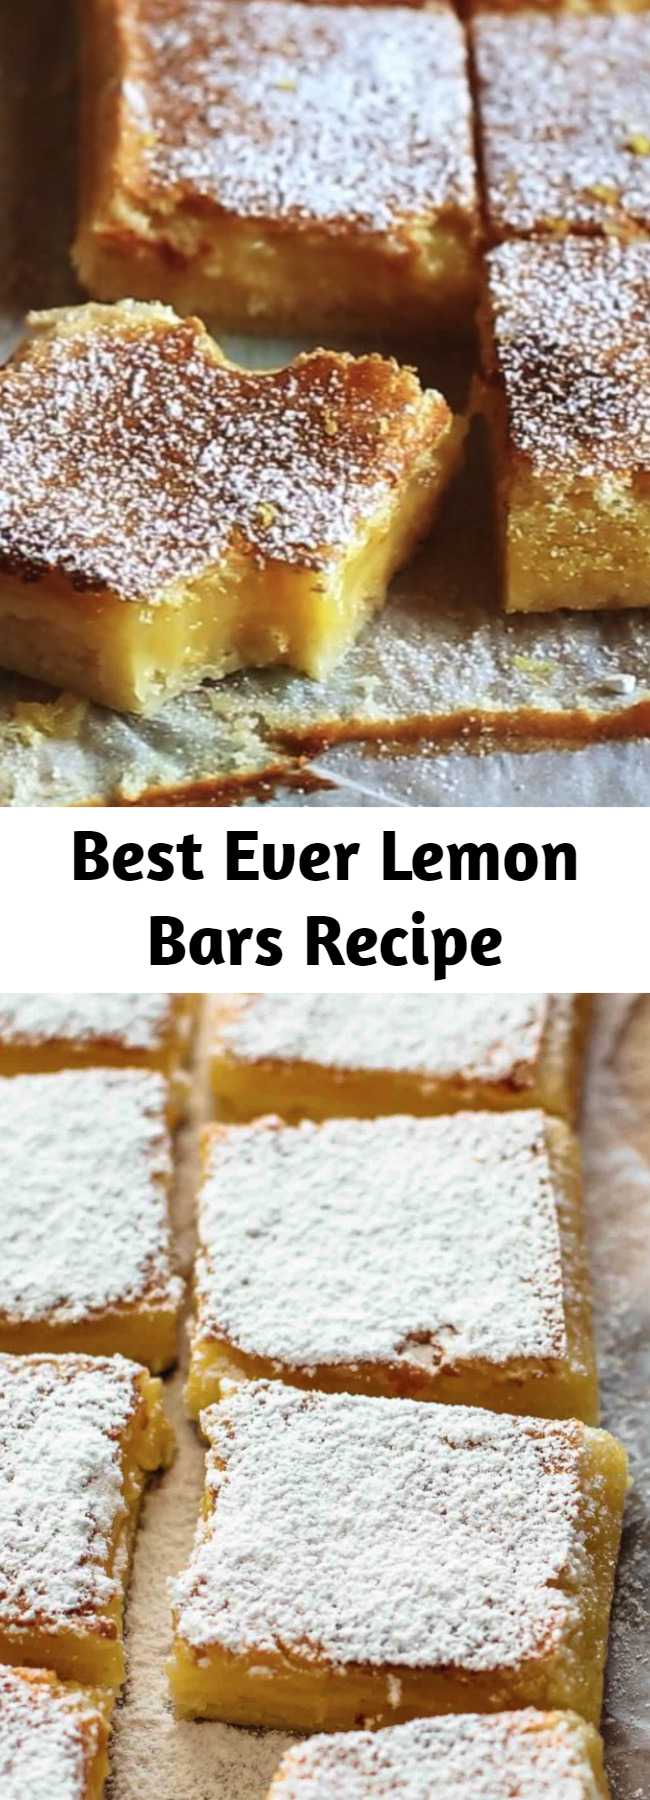 Best Ever Lemon Bars Recipe - These Lemon Bars are sour and sweet and very easy to make. Buttery shortbread crust meets tangy lemon curd filling. You won’t be able to stop eating these. #lemonbars #lemon #sweets #desserts